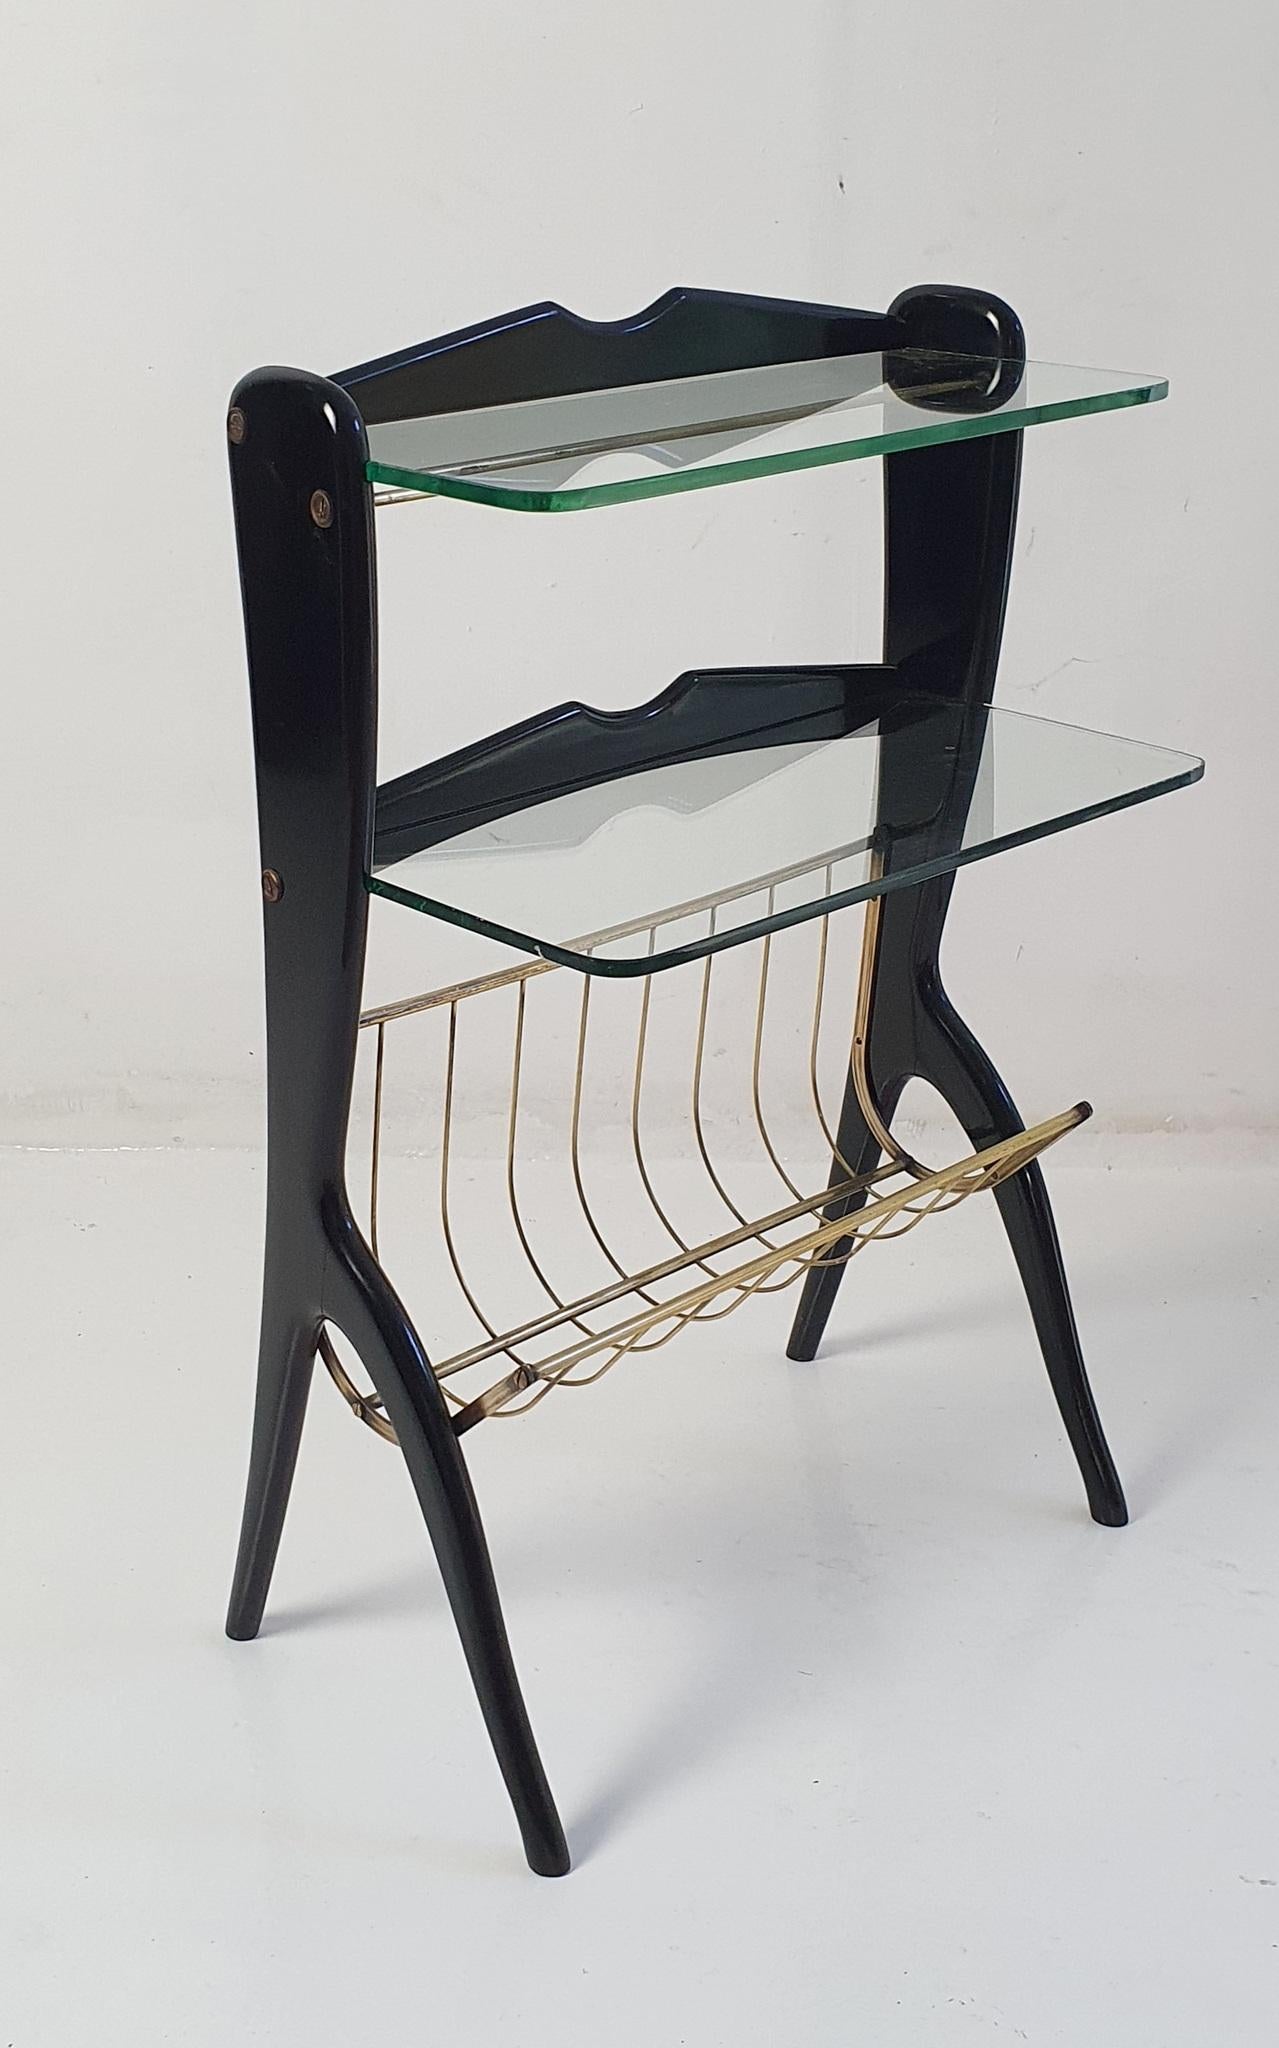 Multi-functional side table by renowned Italian designer Ico Parisi. The sleek side table has a magazine holder as well as having two solid glass shelves. Making it practical and possible to use in various settings. The structure is made from